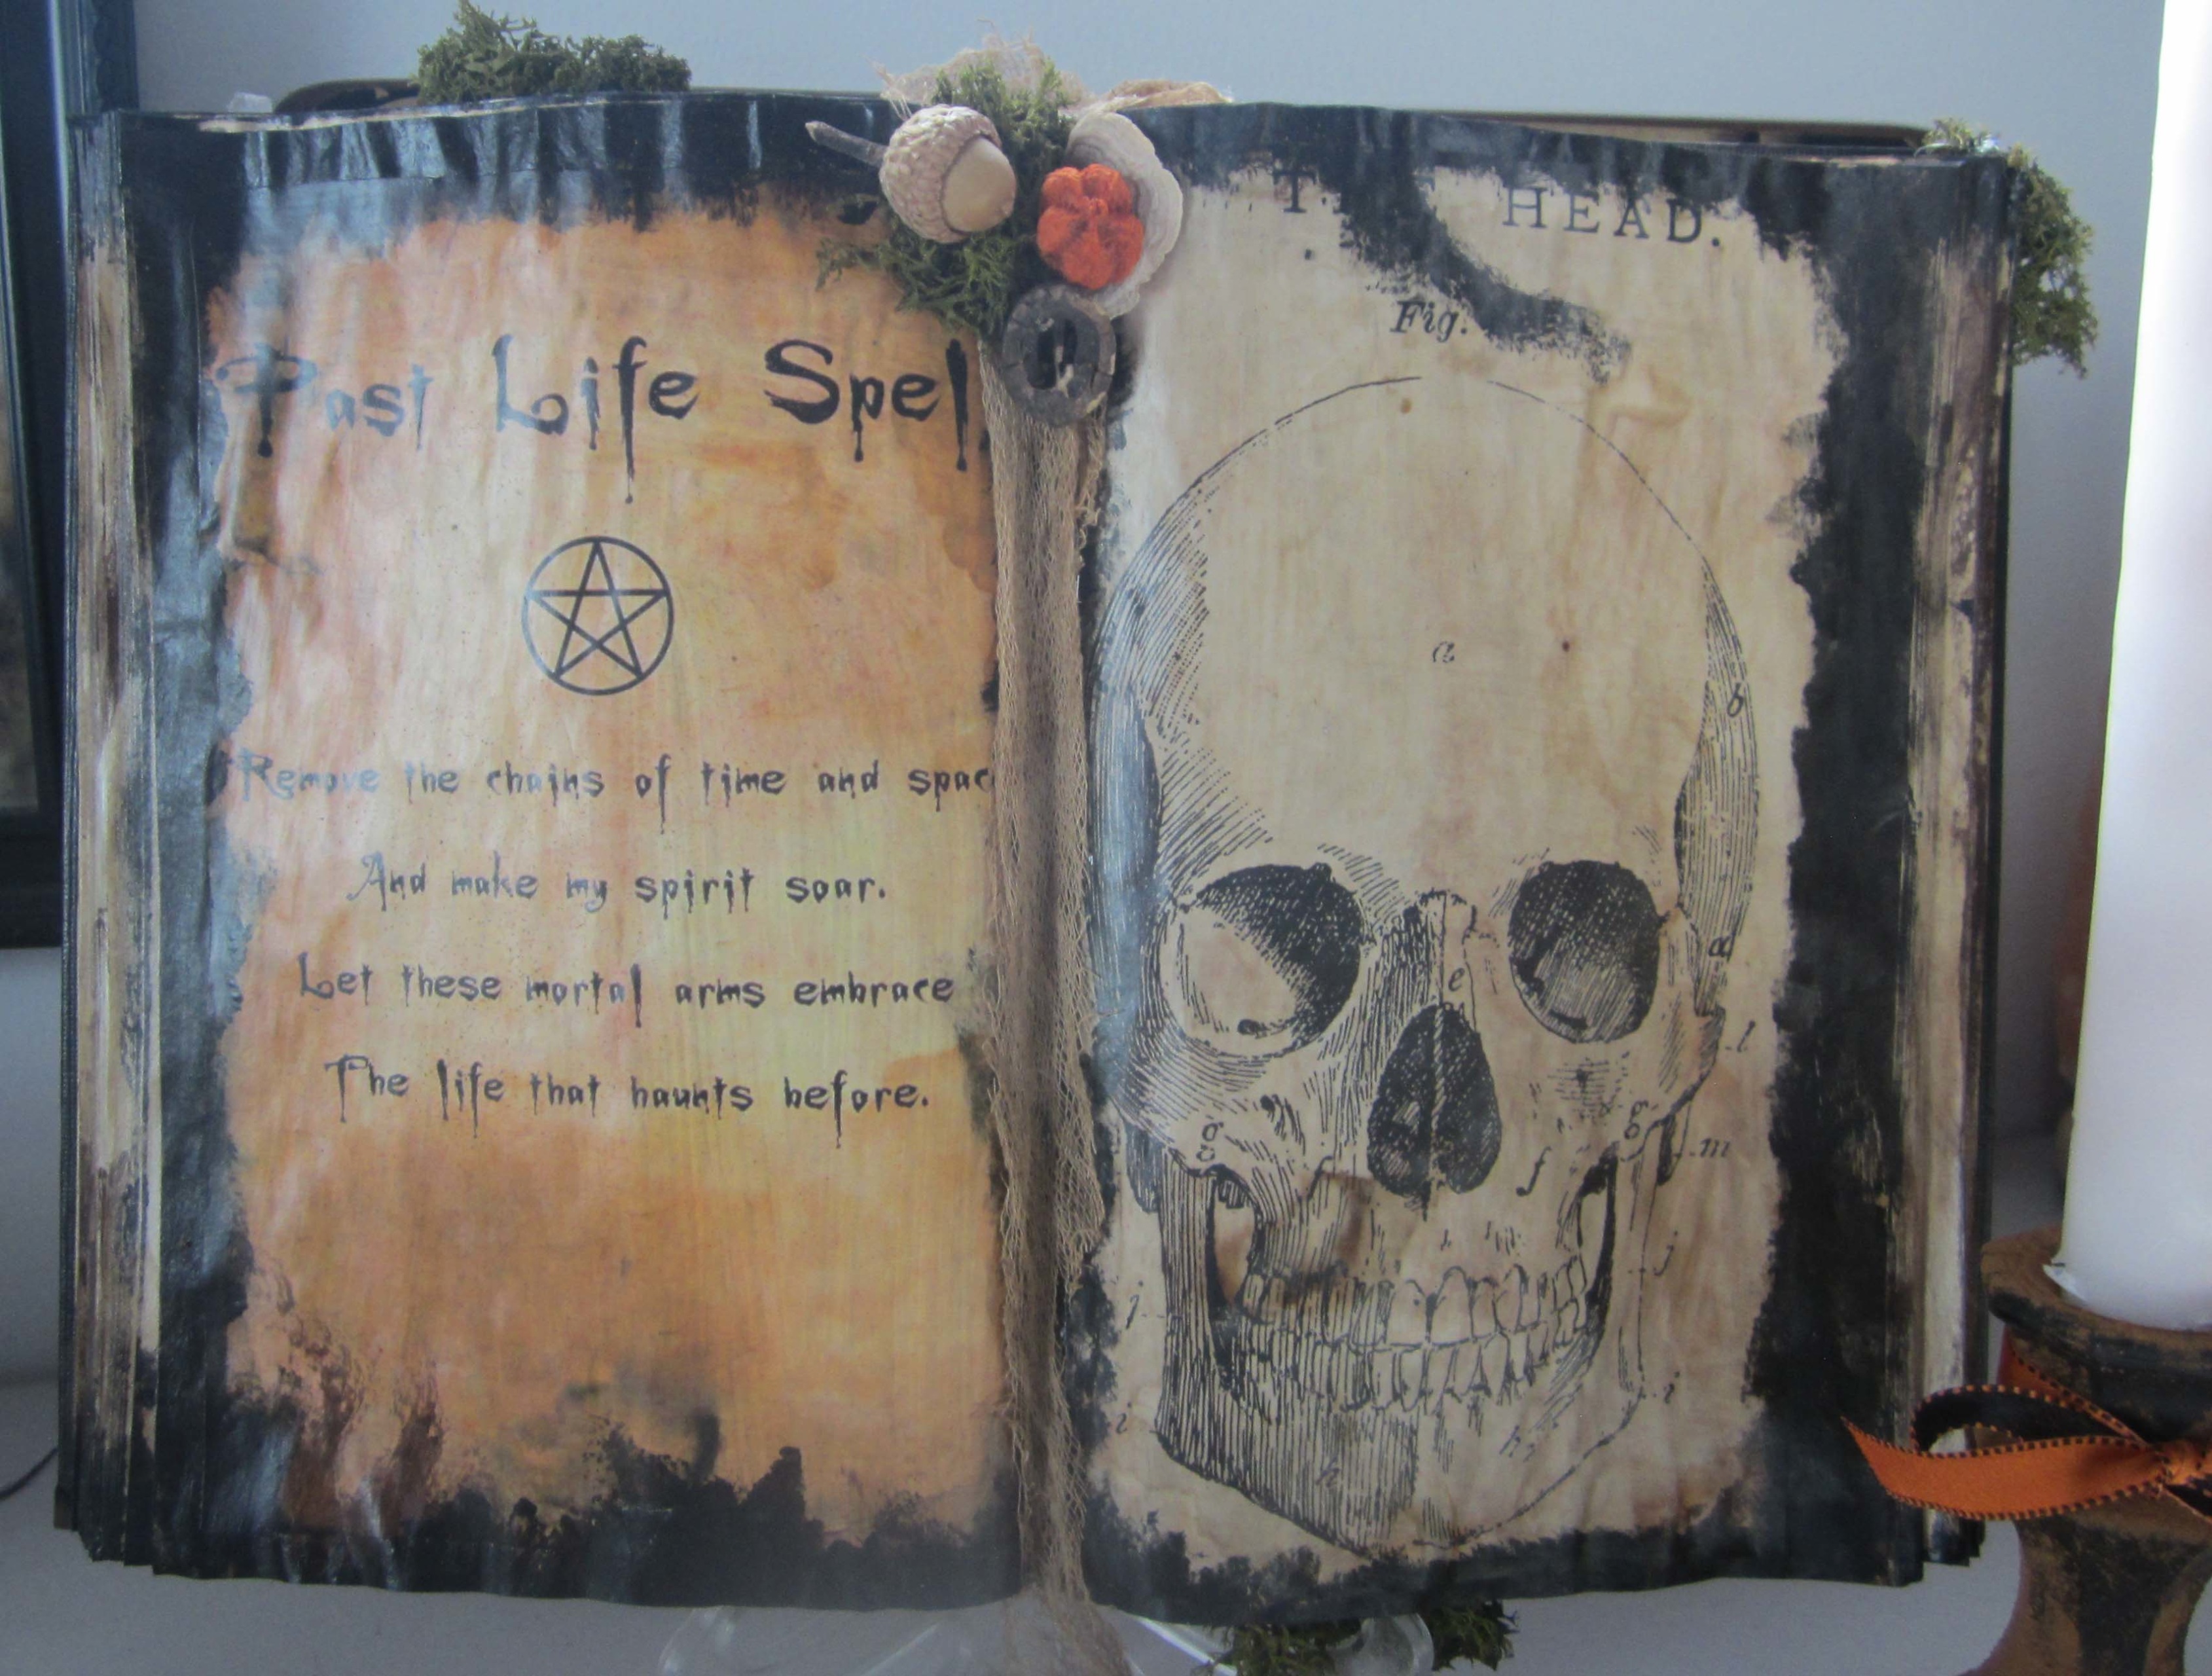 WiniFreD WiTcH's SpeLL bOOk and CaNdLe